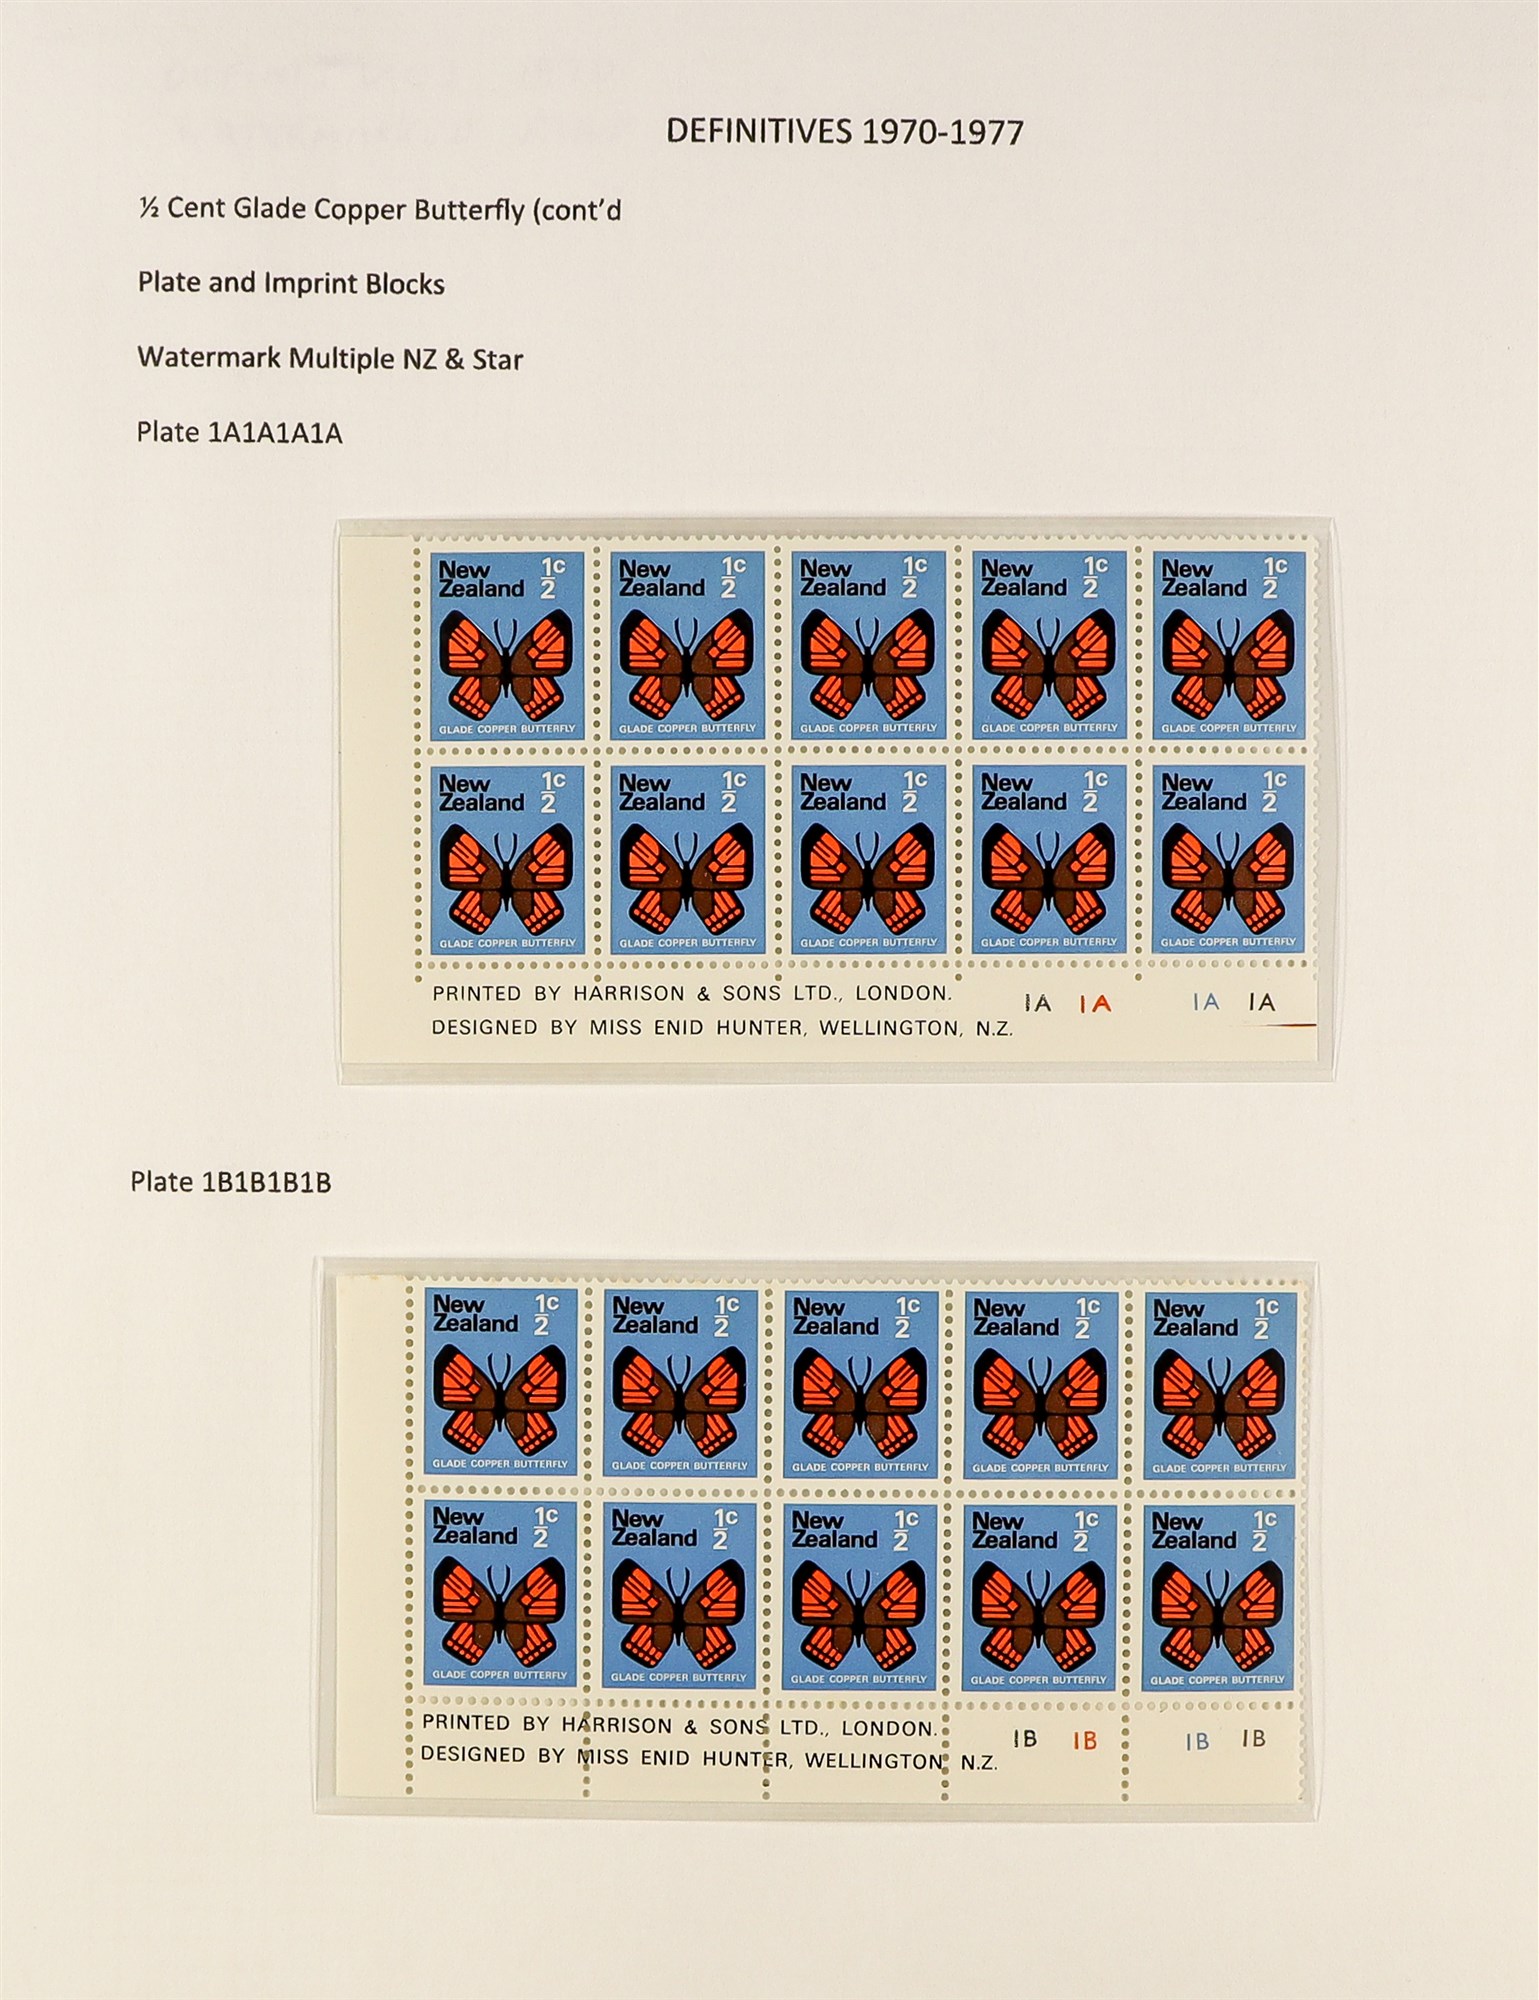 NEW ZEALAND 1970 - 1976 PICTORIALS SPECIALIZED COLLECTION of 110+ never hinged mint plate +